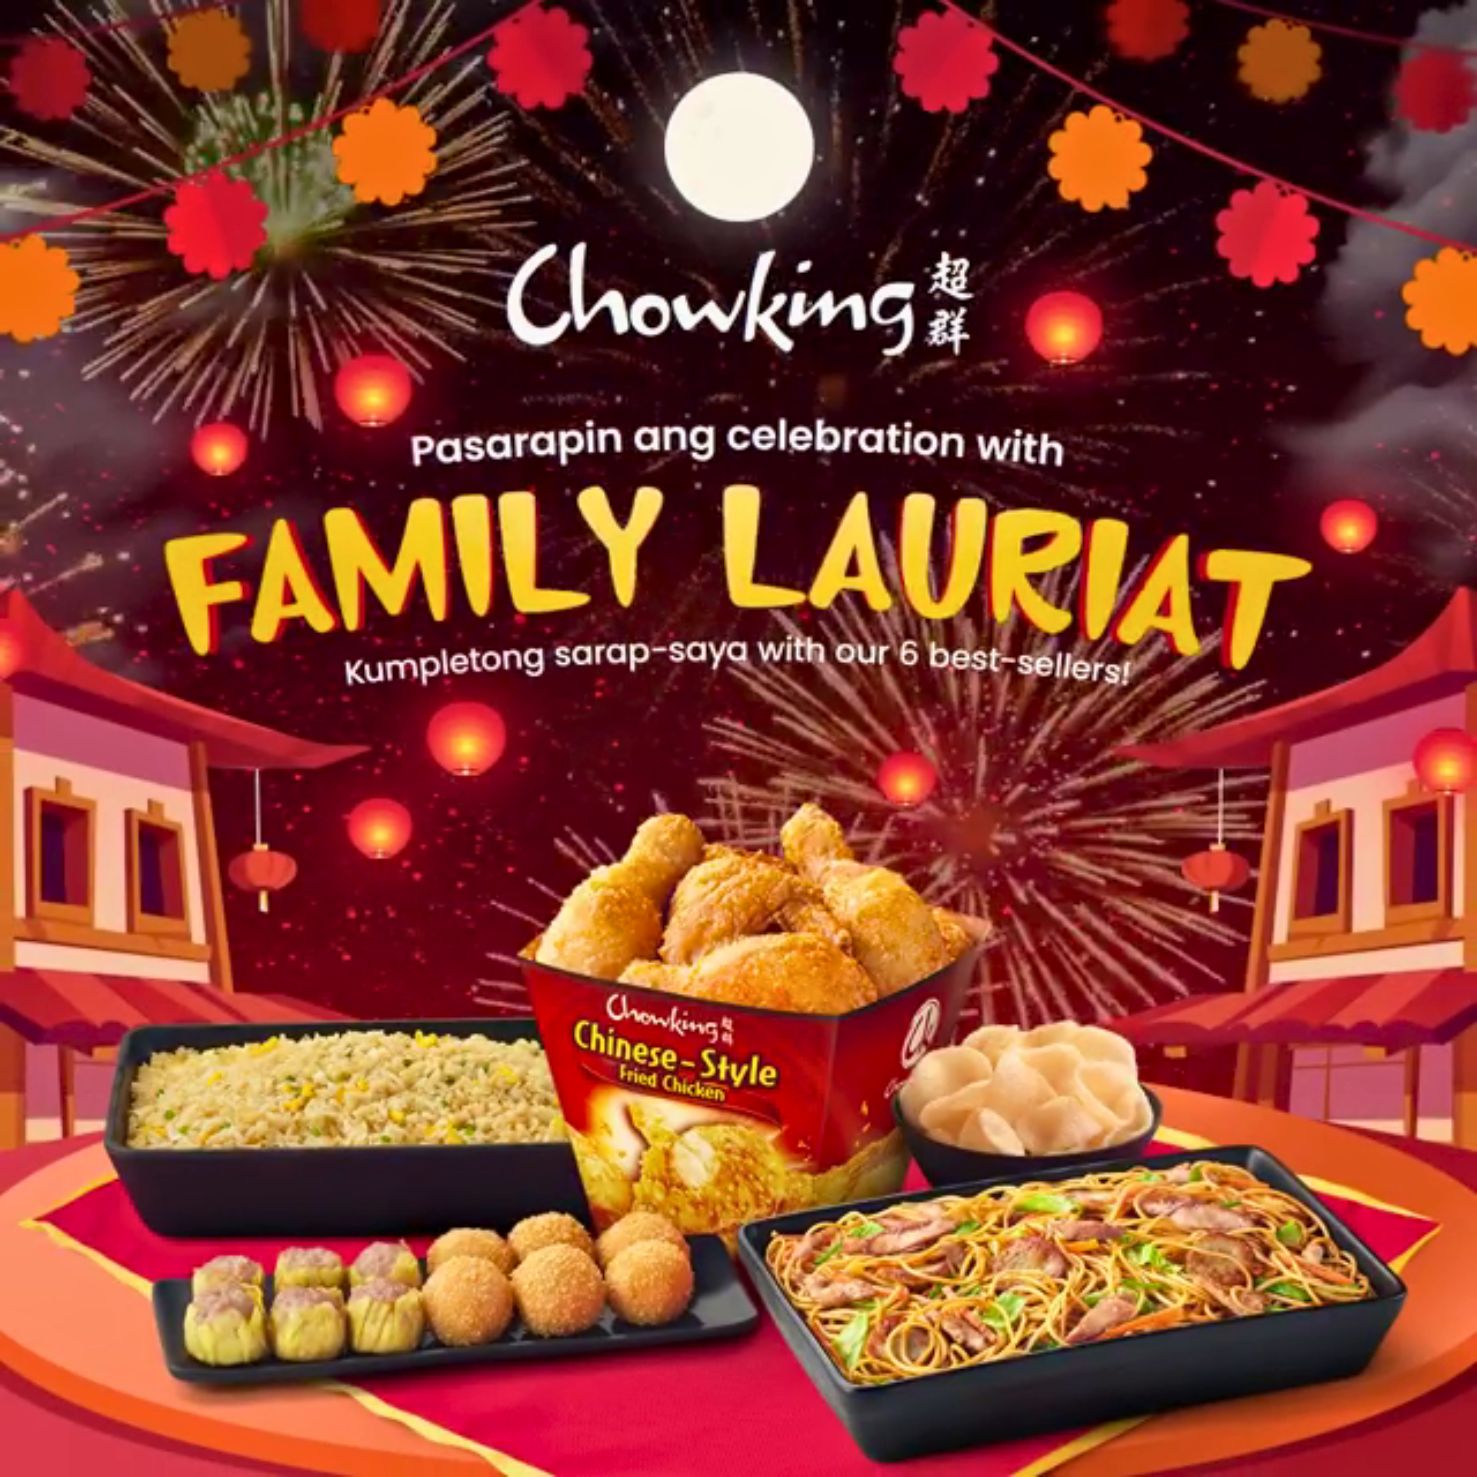 chowking family lauriat